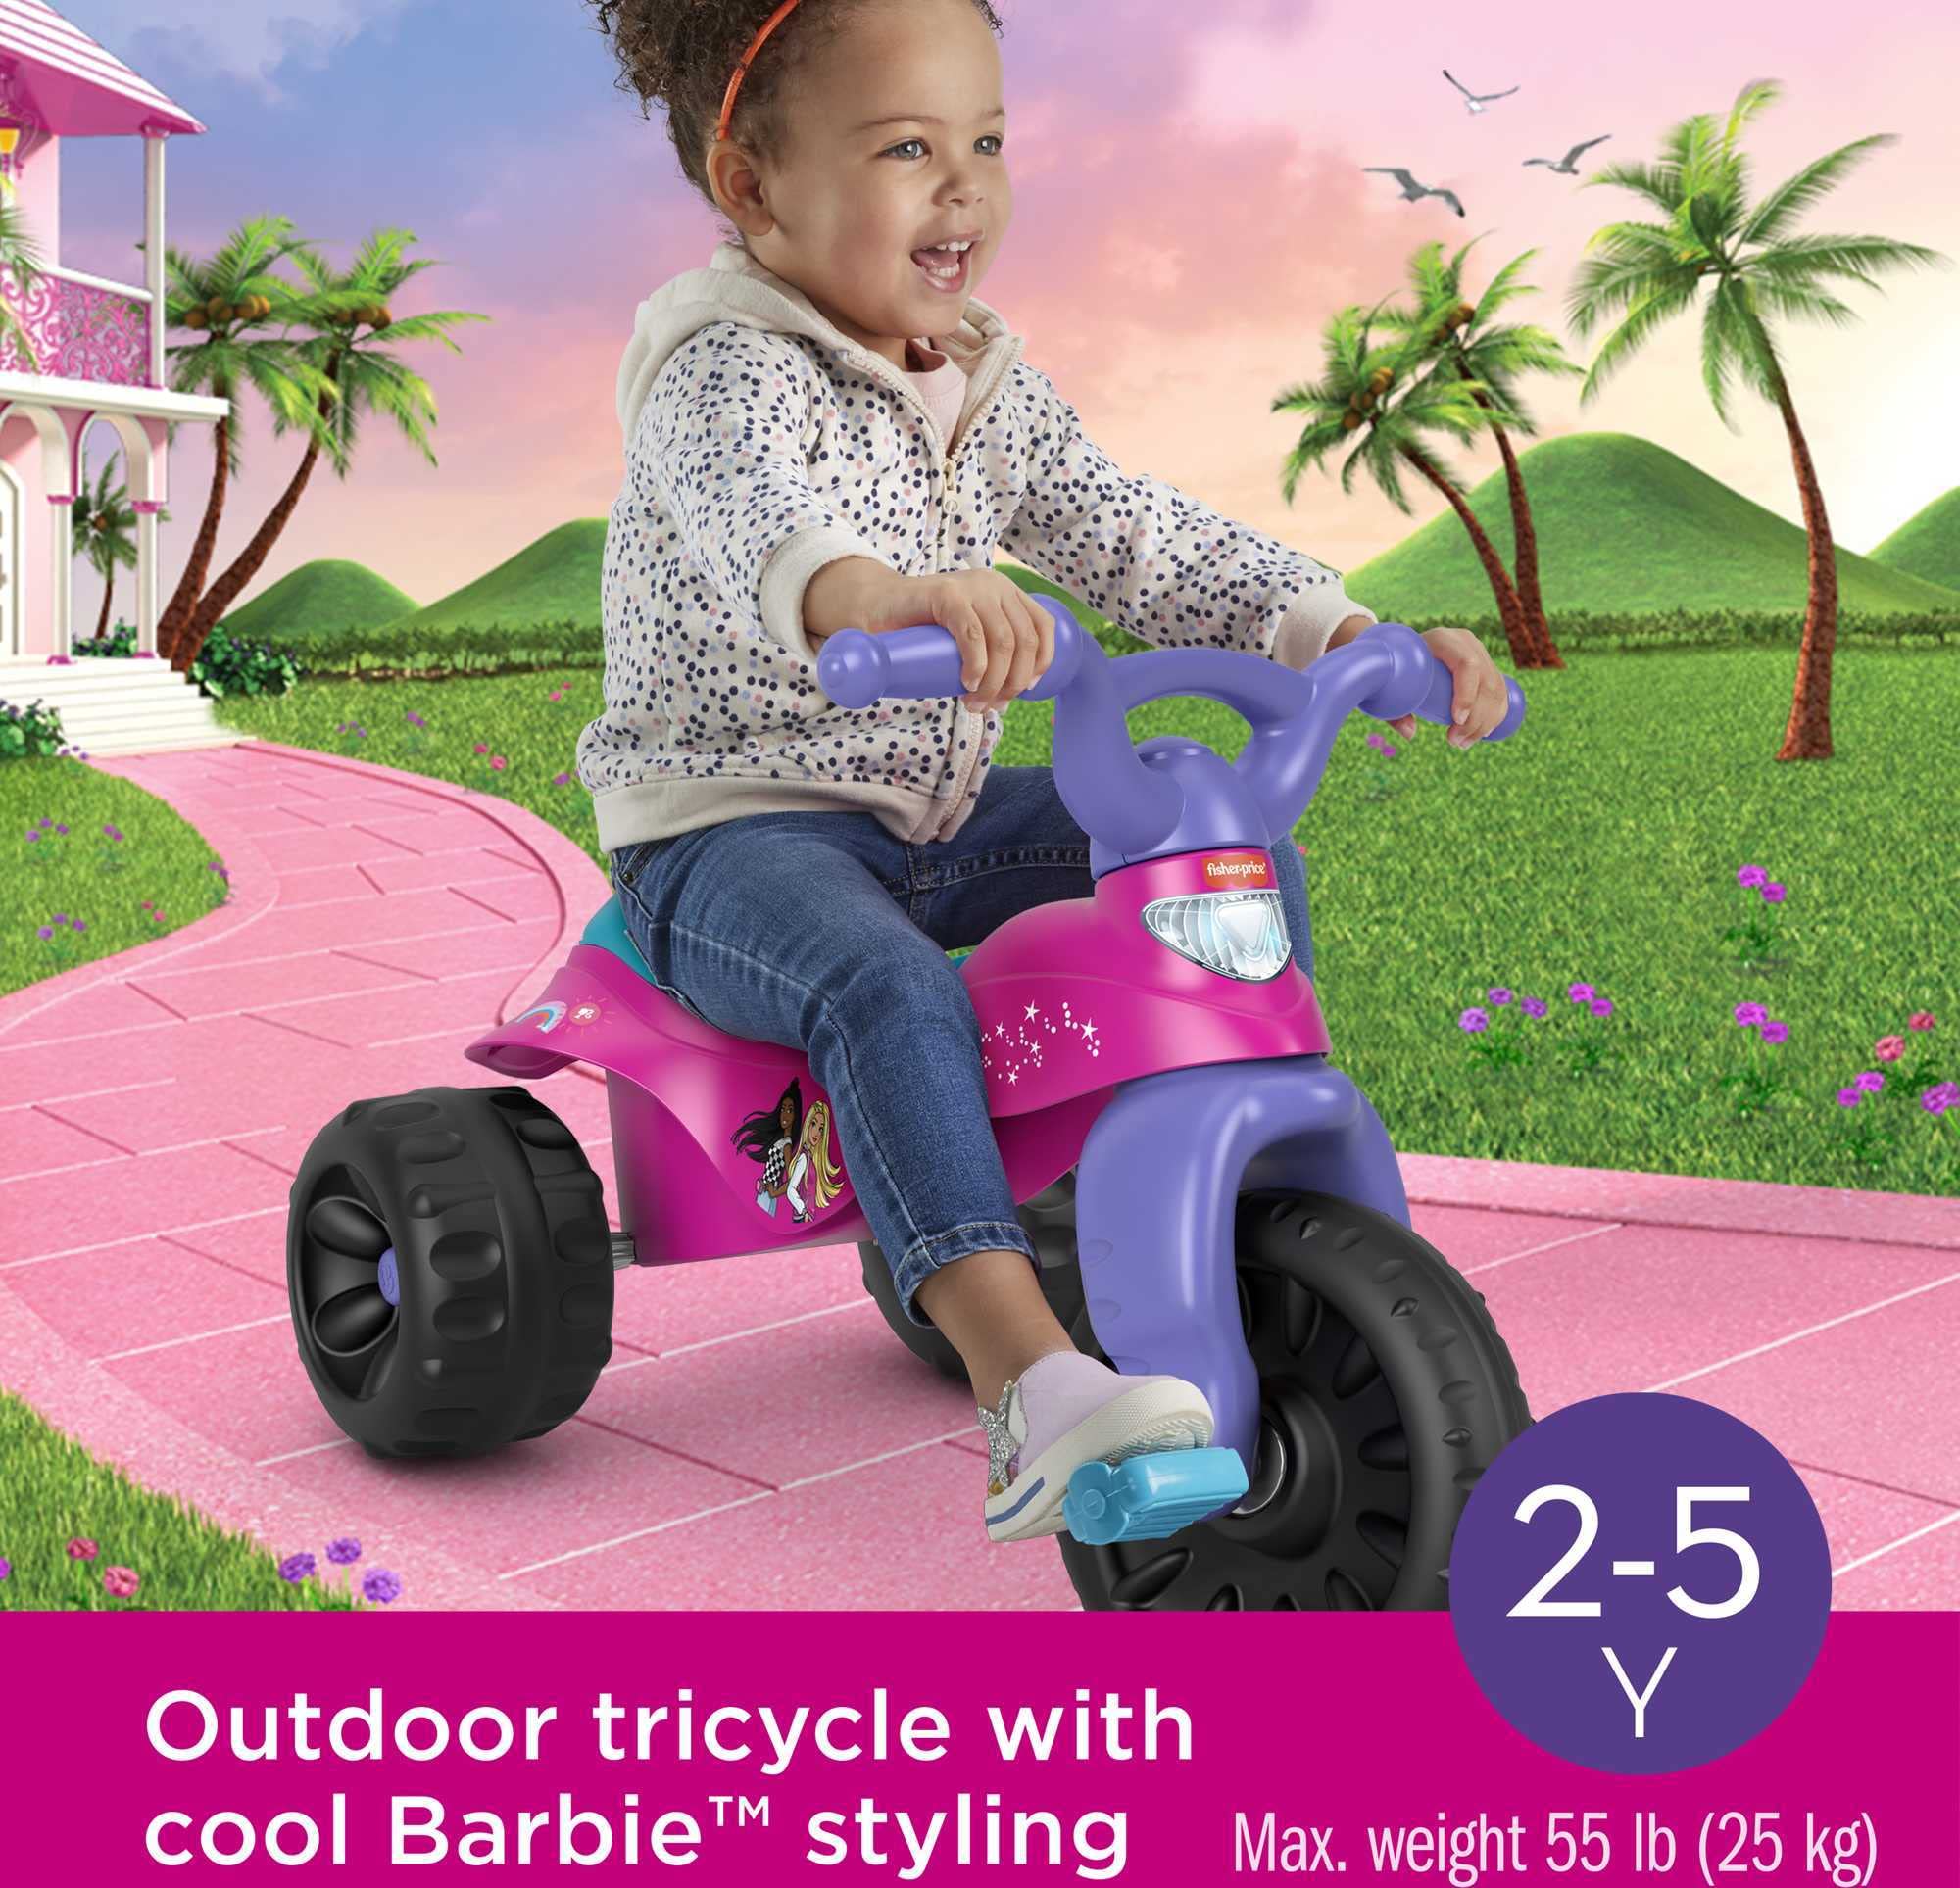 Fisher-Price Barbie Tricycle with Handlebar Grips and Storage Area, Multi-Terrain Tires, Tough Trike Large, Multi-color